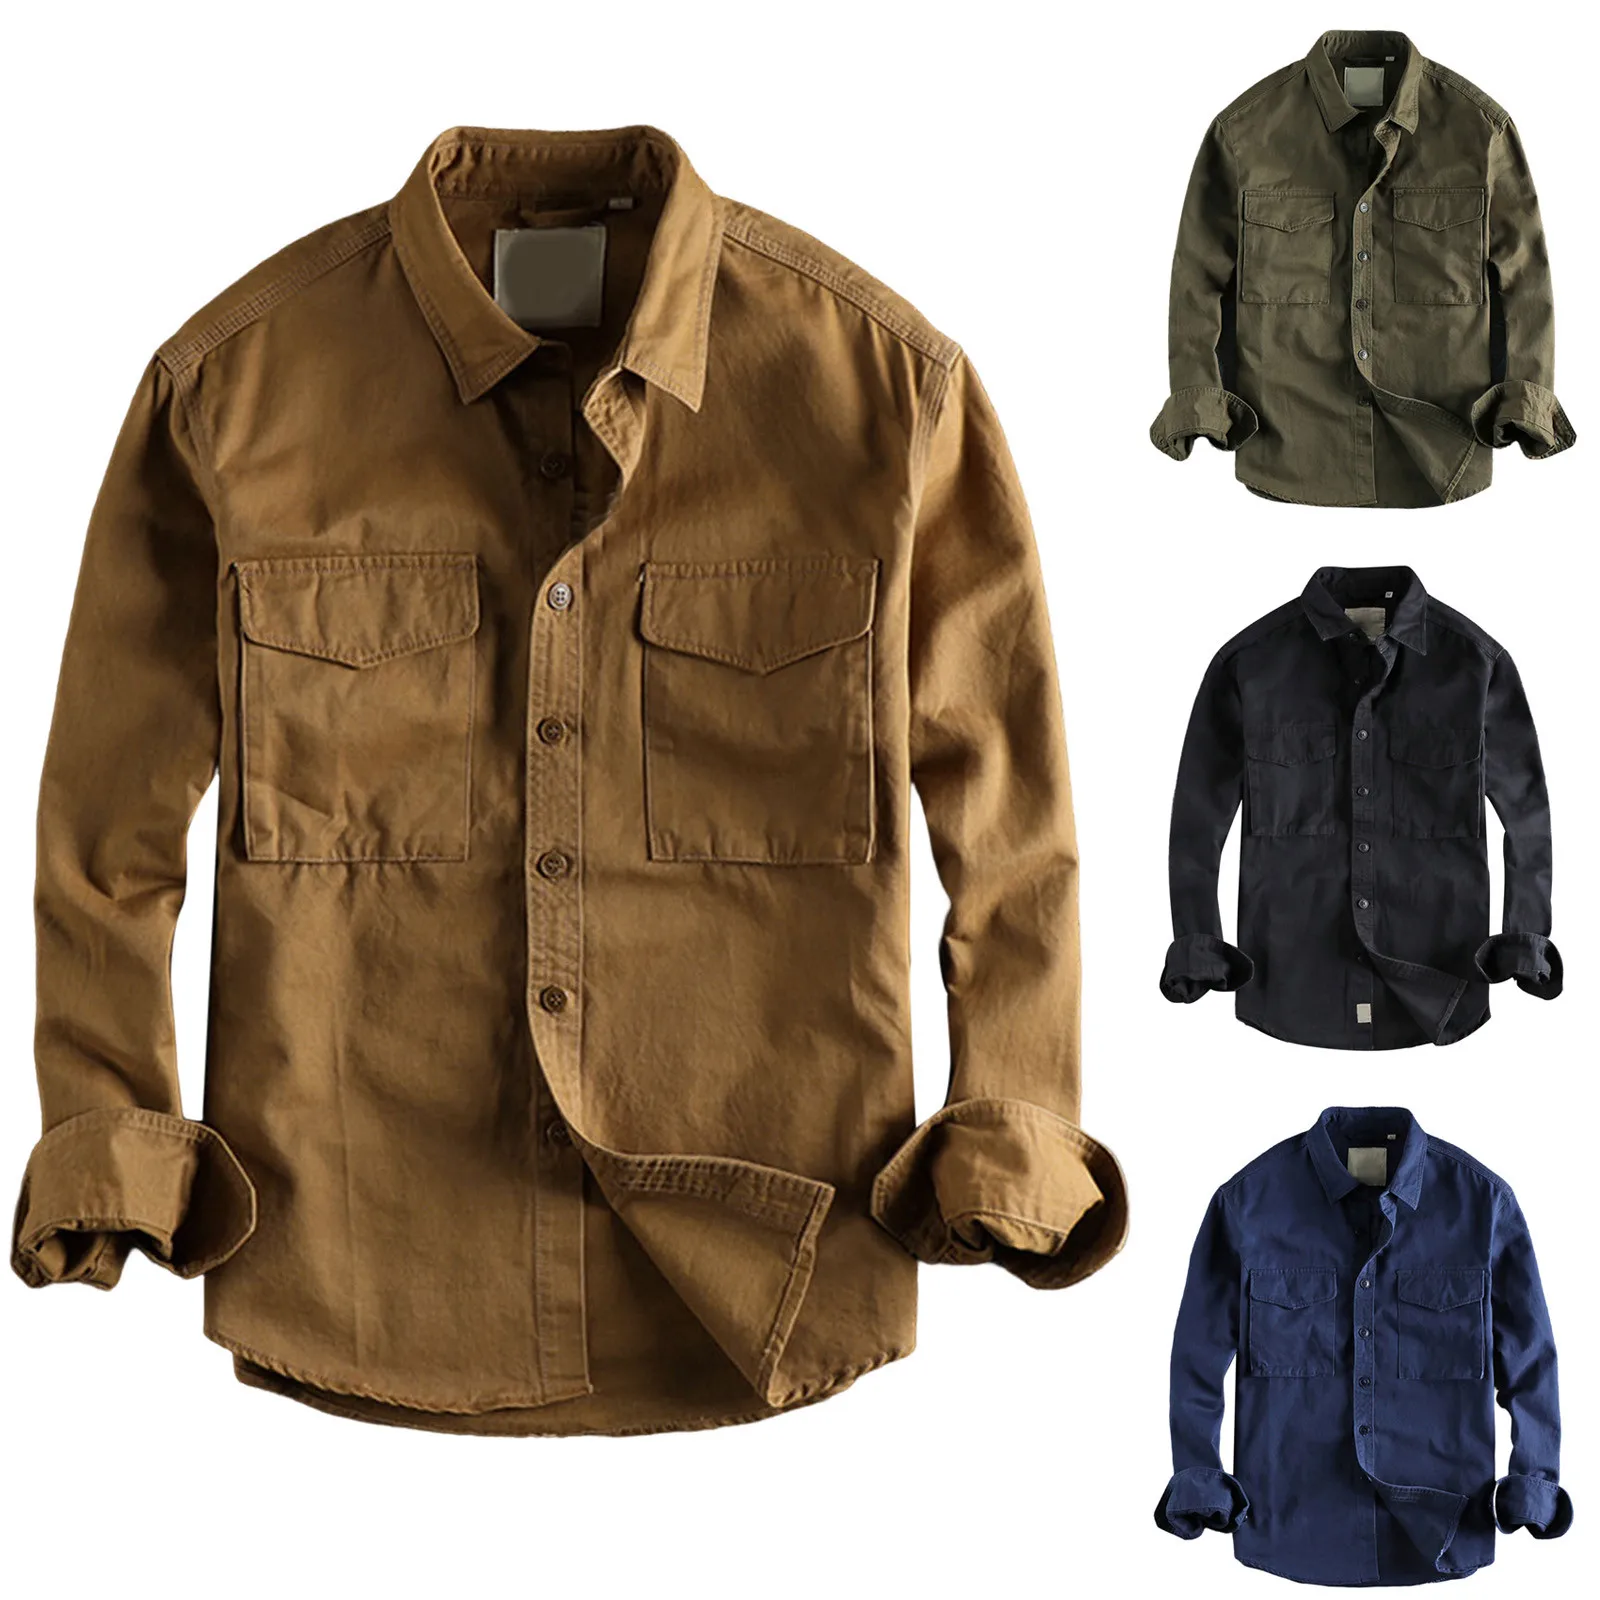 

2023 Cargo Shirt Men Long Sleeve Casual Cotton Shirts High Quality Camisa Militar Overshirt Brand Clothing Daily Casual Blouses